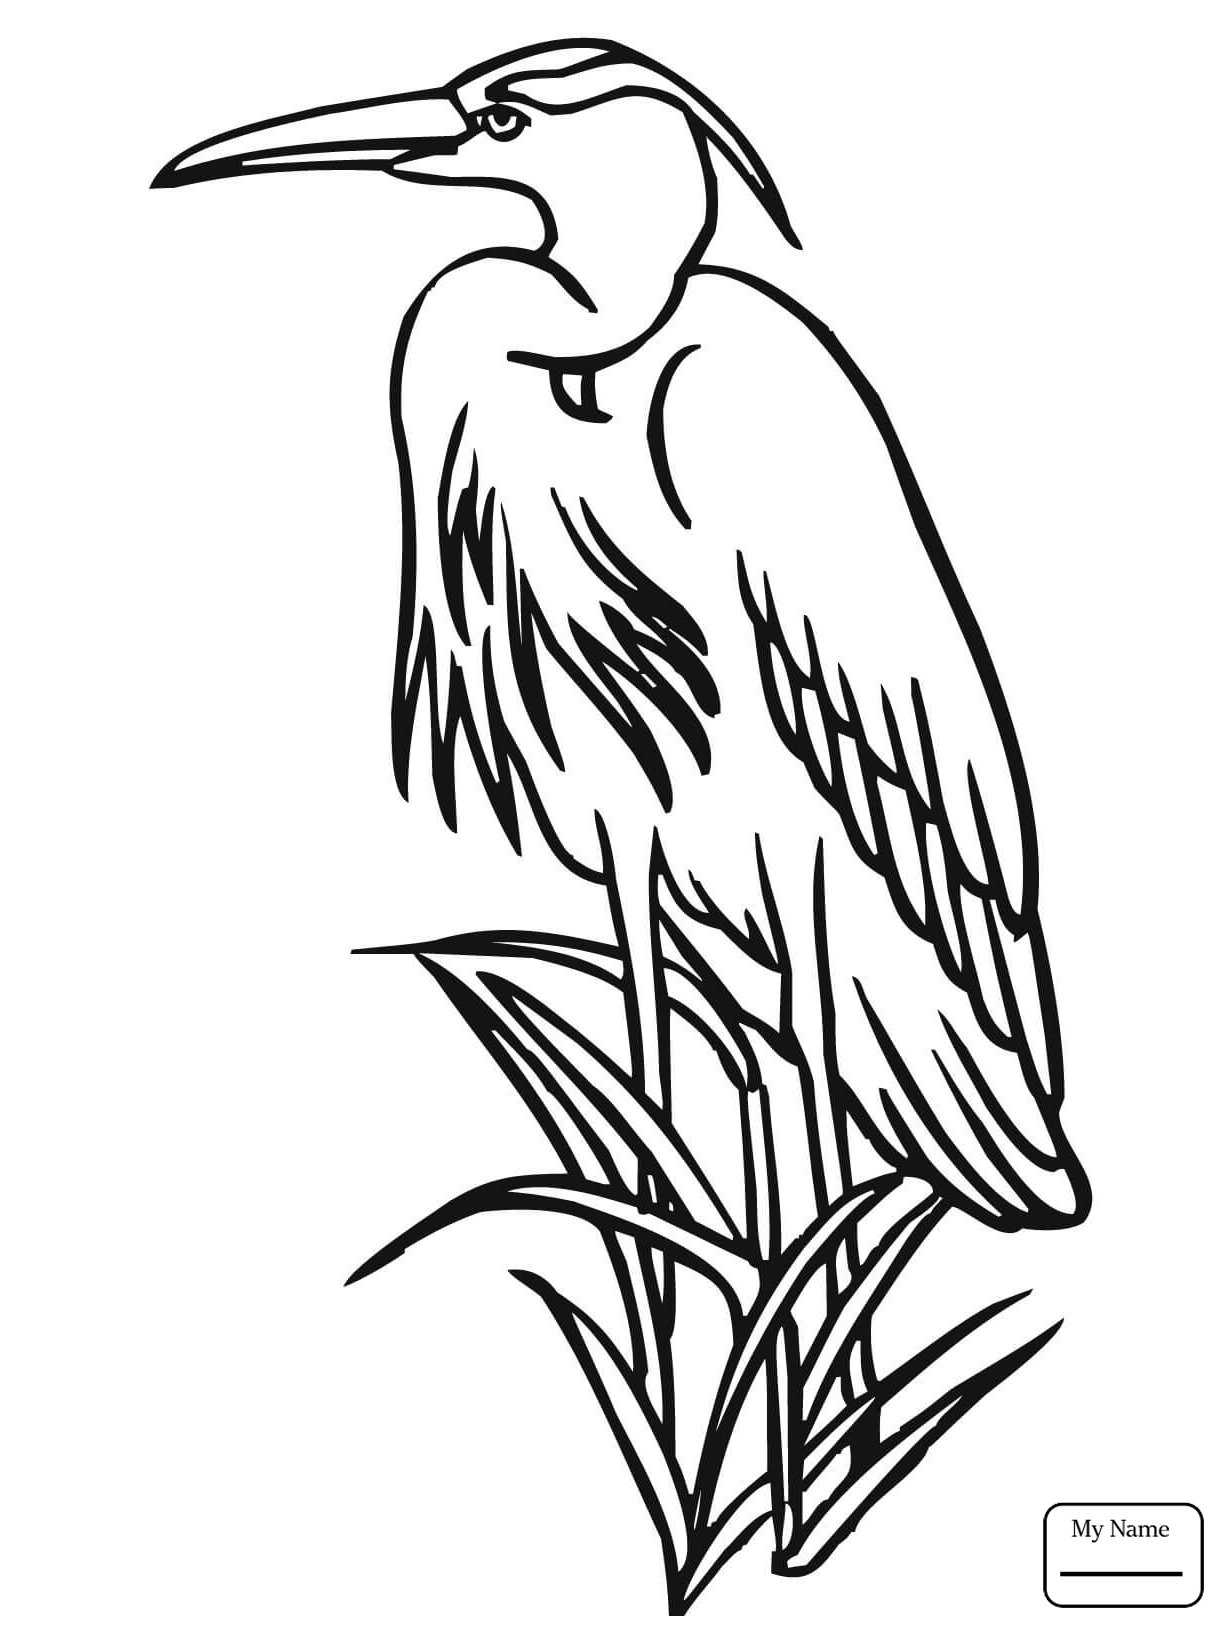 The best free Heron drawing images Download from 193 free drawings of